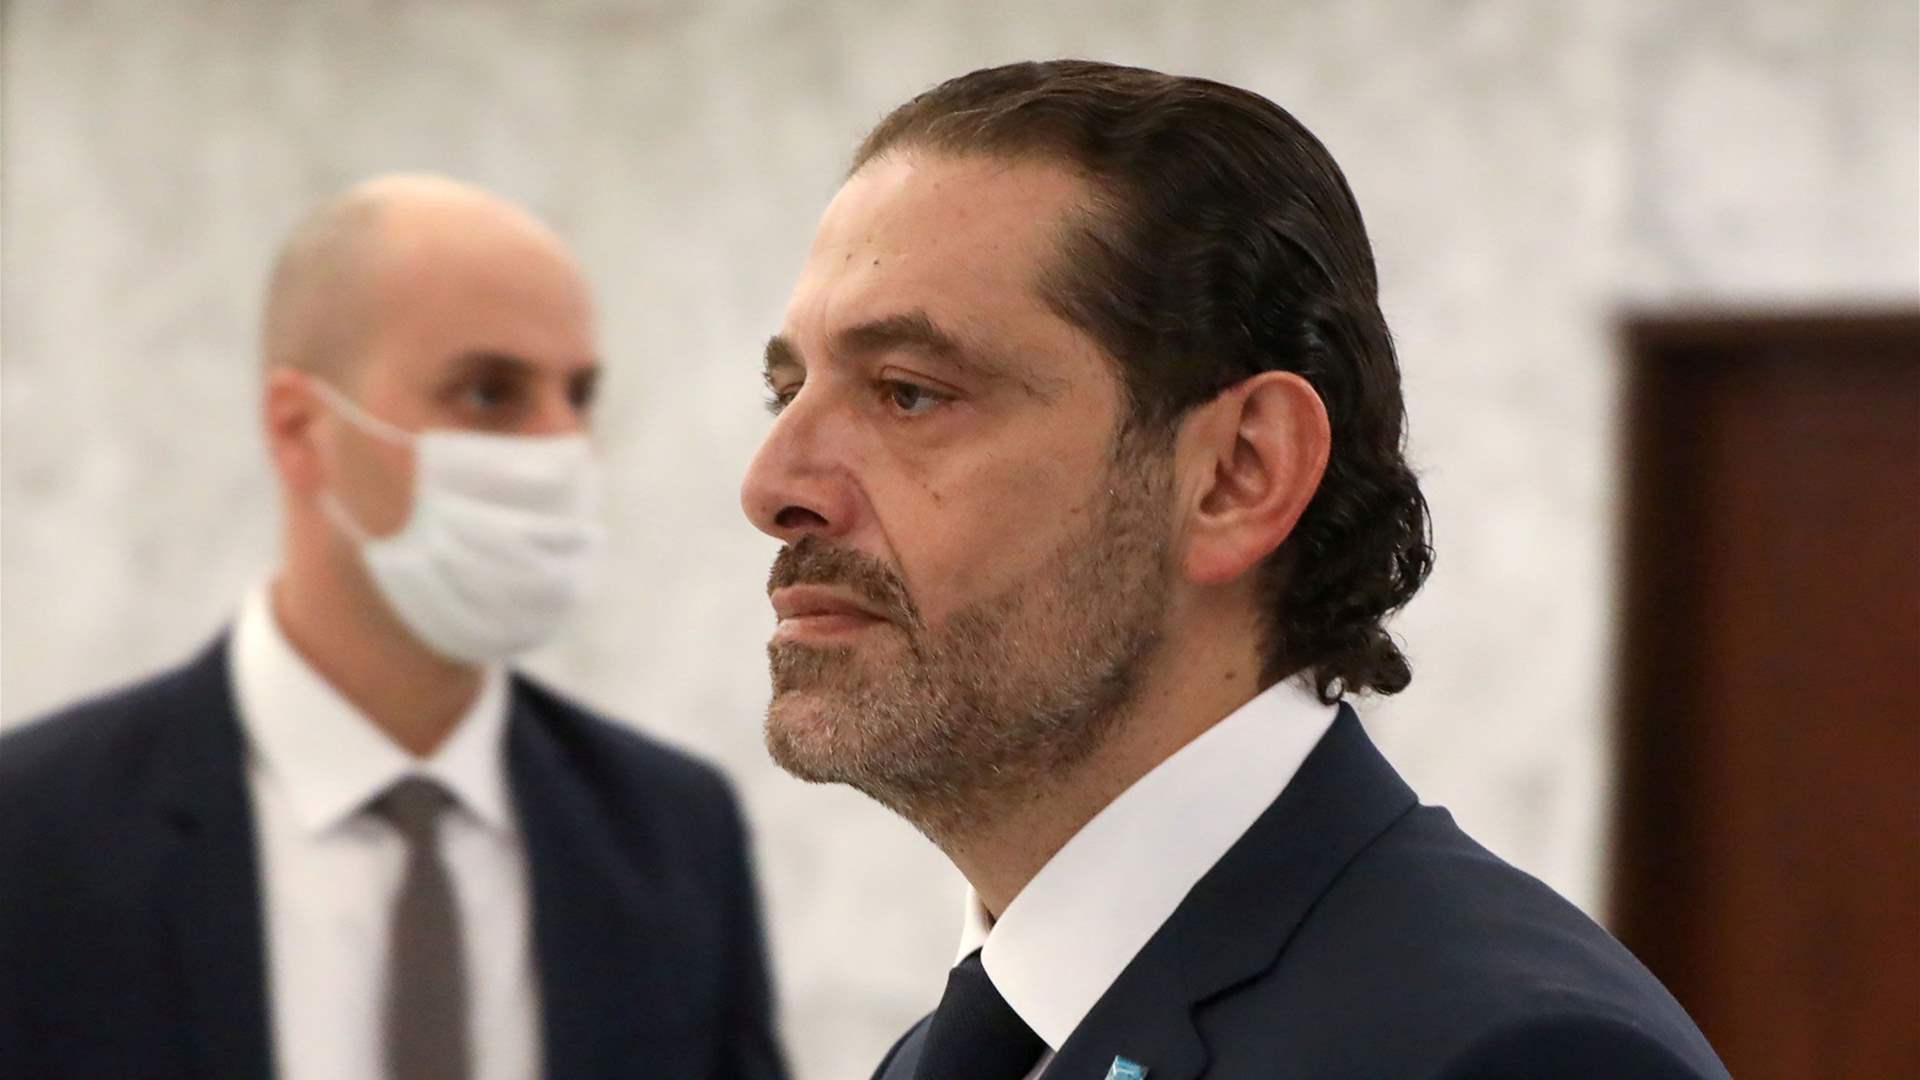 The media office of Saad Hariri stands firm on decision to suspend political activities